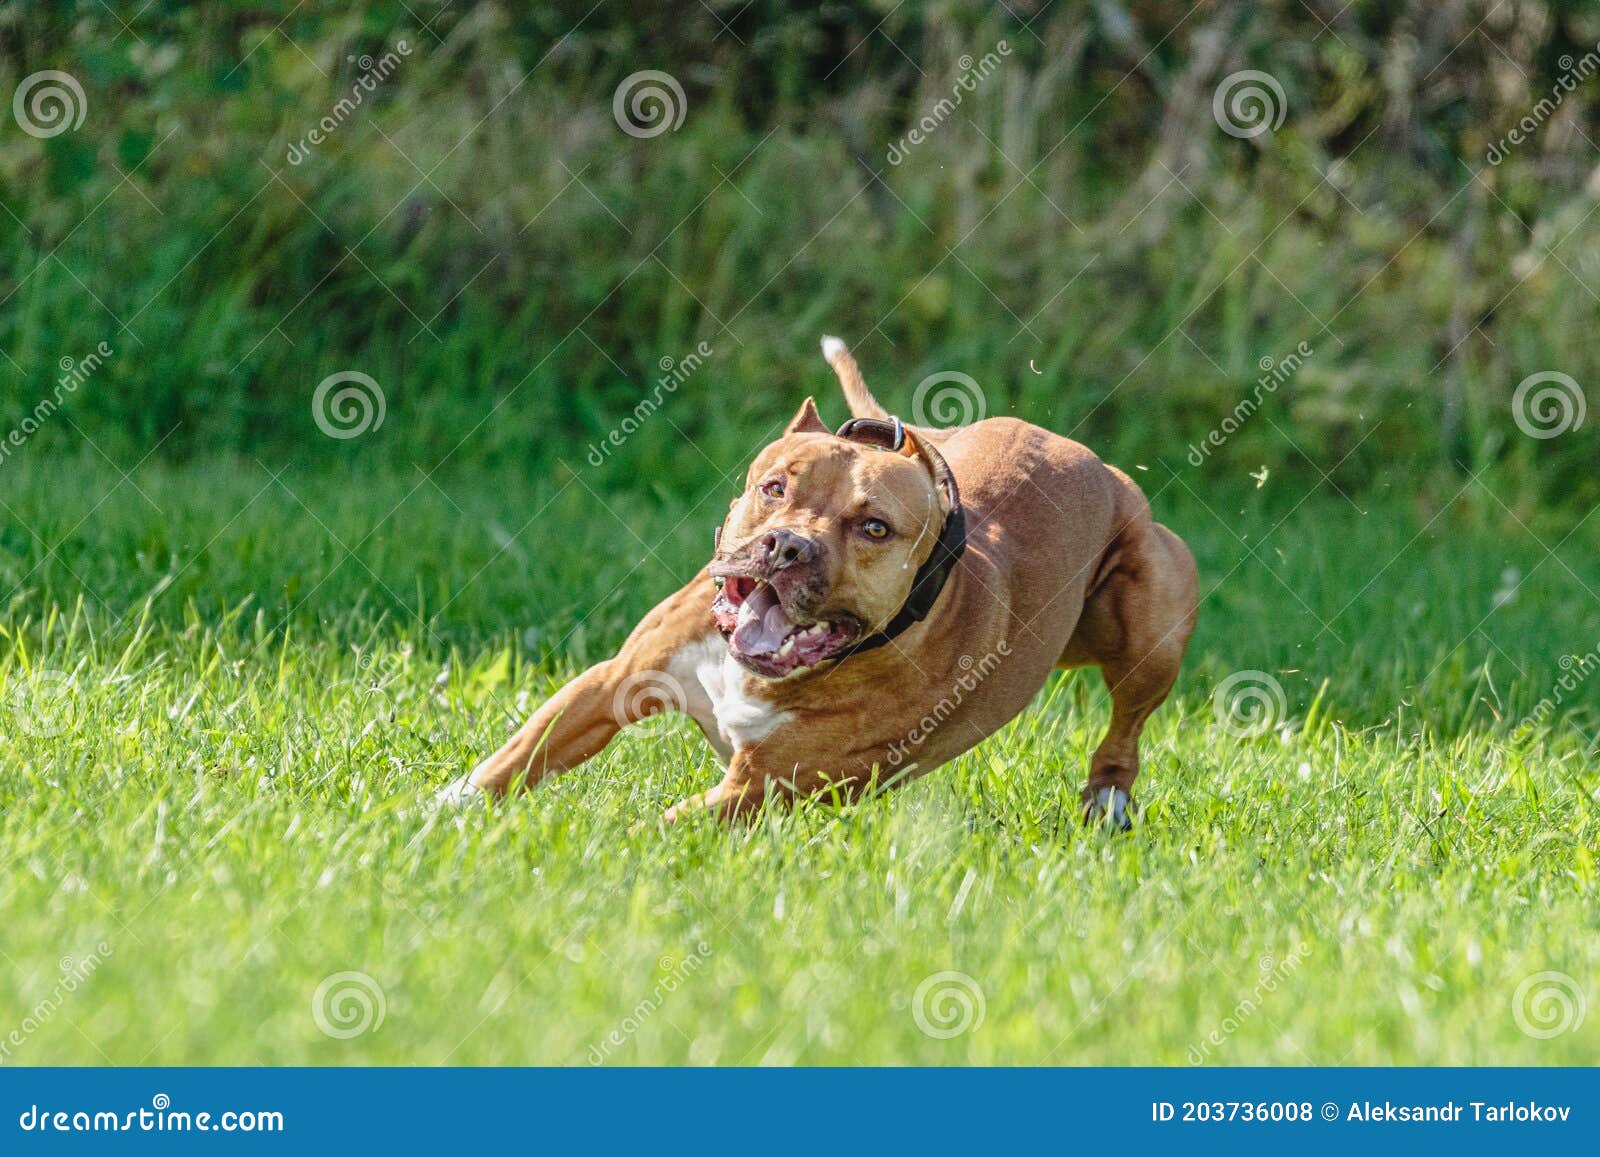 American Pit Bull Running in the Field Stock Photo - Image of animal ...